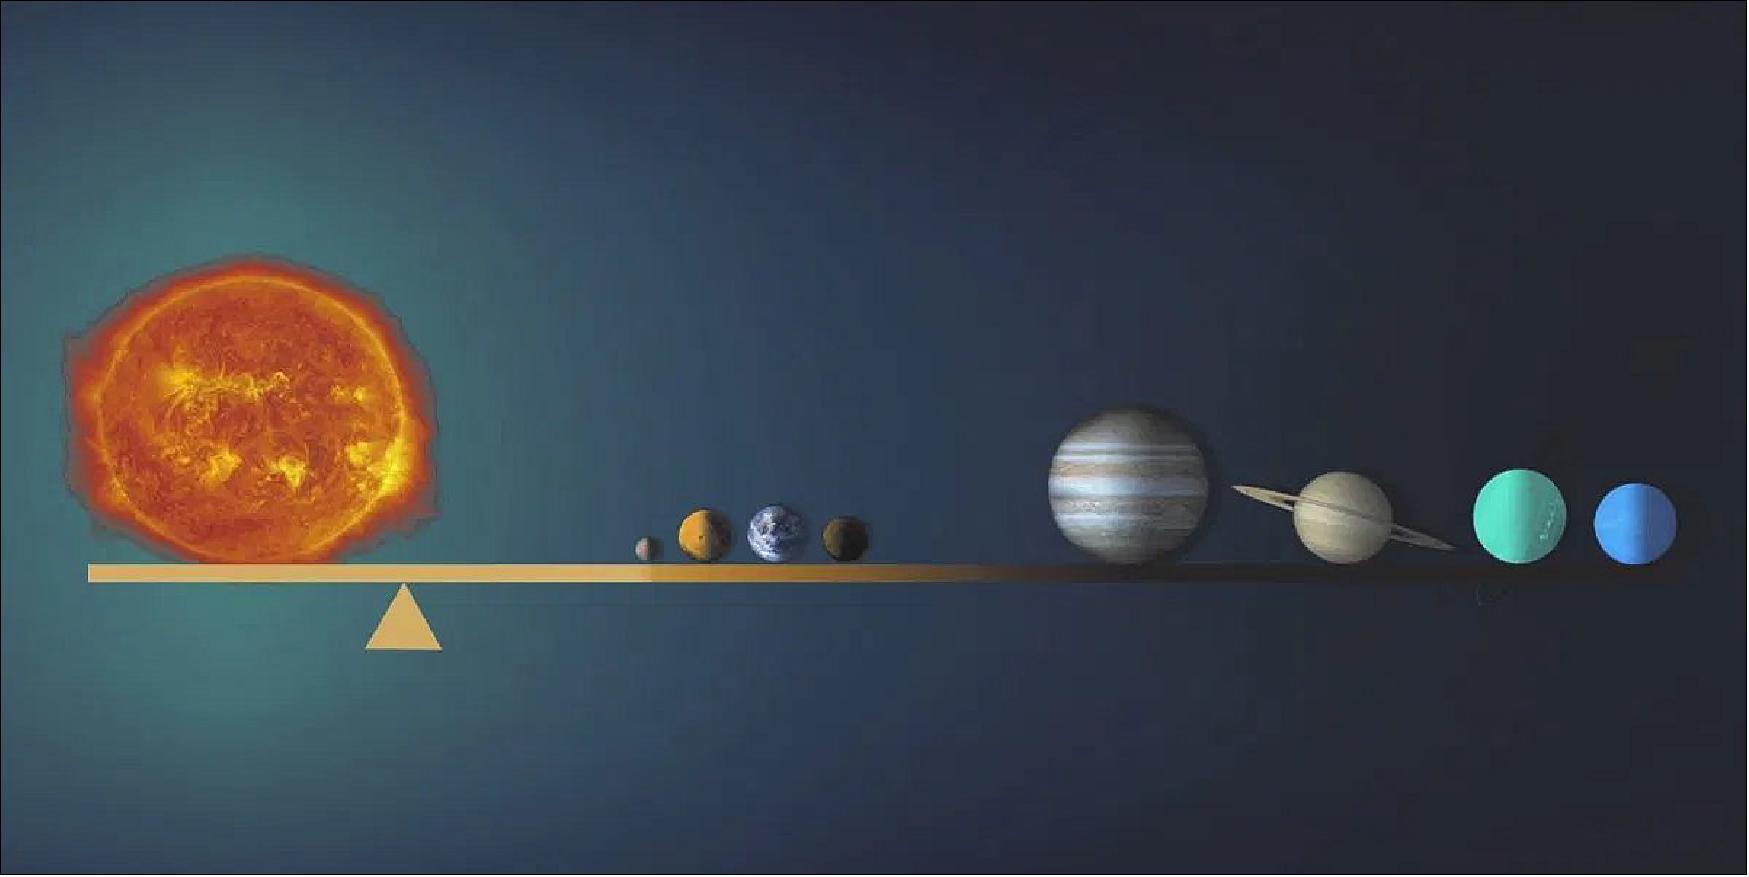 Figure 48: An artist's rendering of the barycenter, the absolute center and location of stillness in the center of our solar system, where the masses of all planets, moons, and asteroids balance out. It's the pivot of the solar system seesaw (image credit: Tonia Klein, NANOGrav Physics Frontier Center)